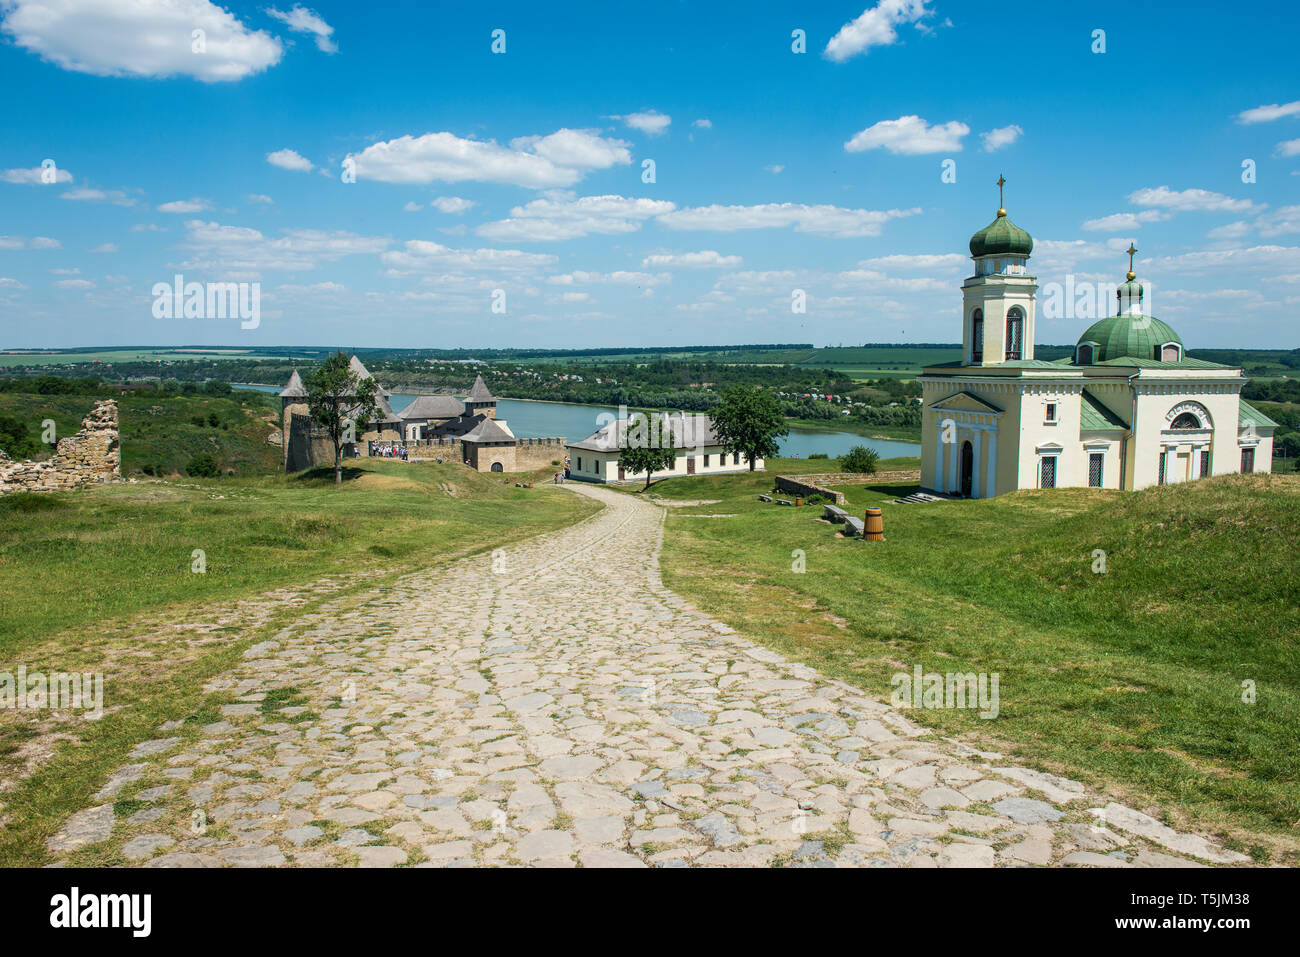 Khotyn Fortress on the river banks of the Dniester, Ukraine Stock Photo